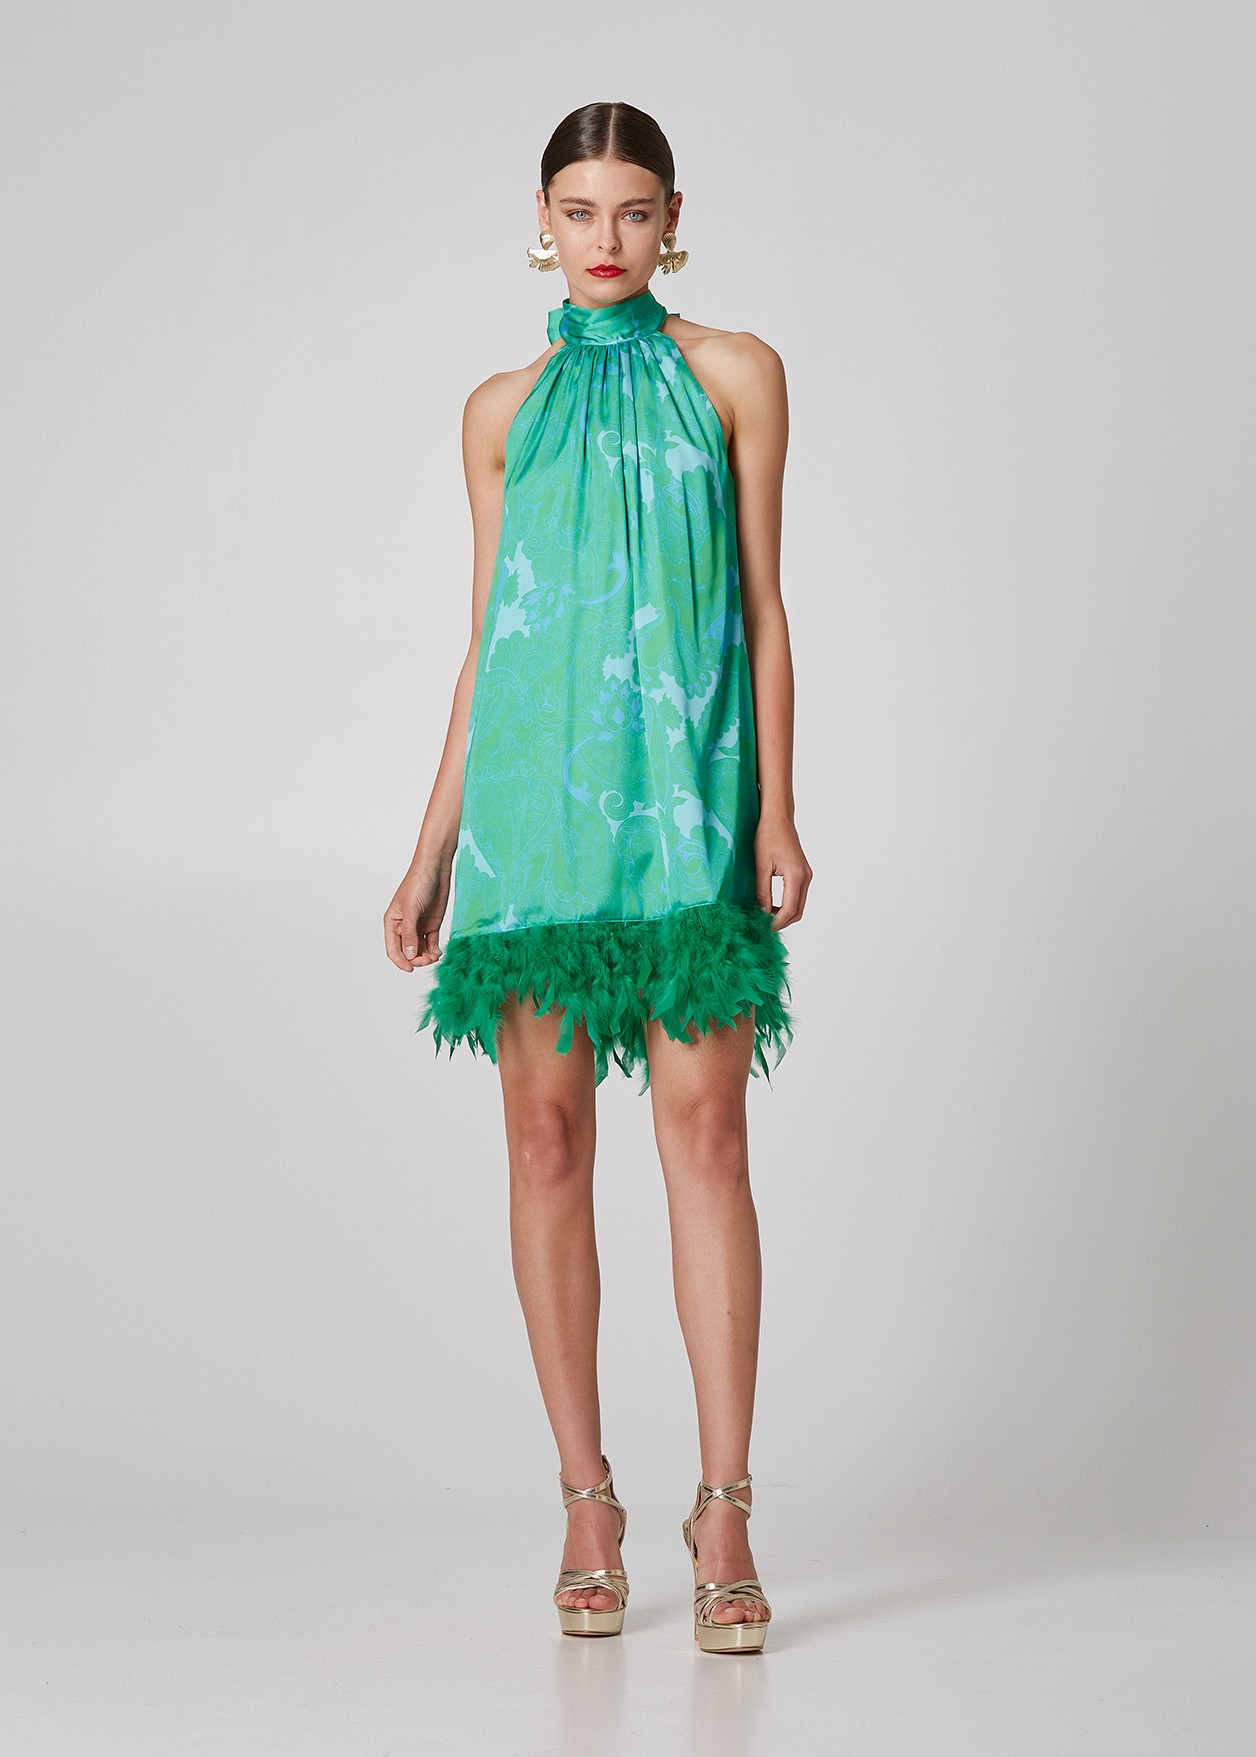 Mini dress with satin look and decorative feathers